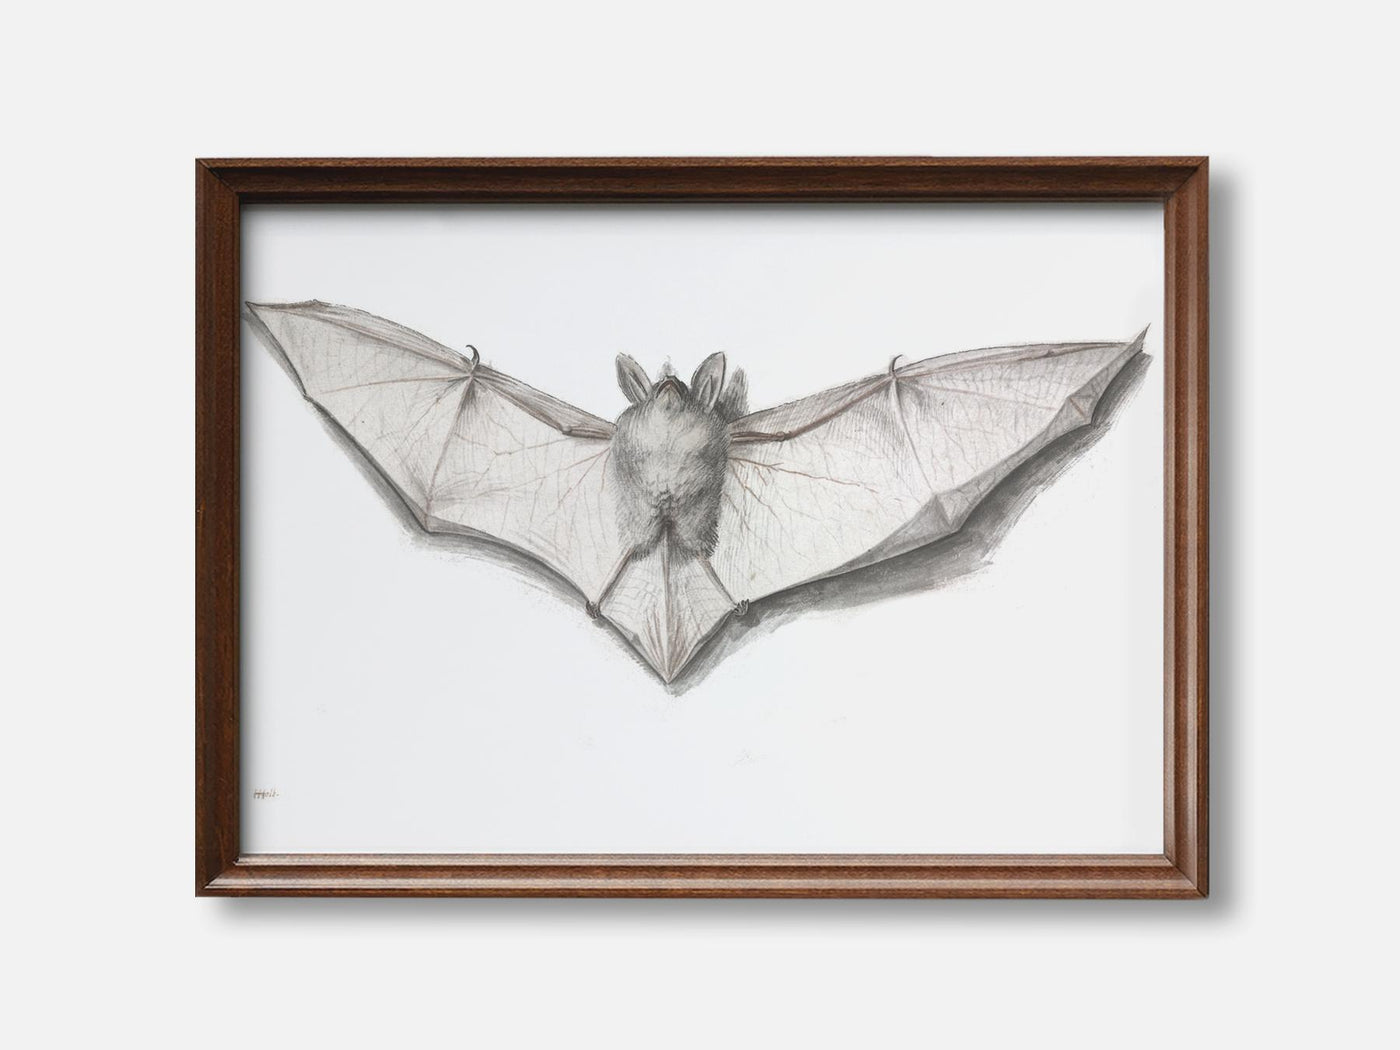 Bat with Outspread Wings mockup - A_h10-V1-PC_F+WA-SS_1-PS_5x7-C_def variant